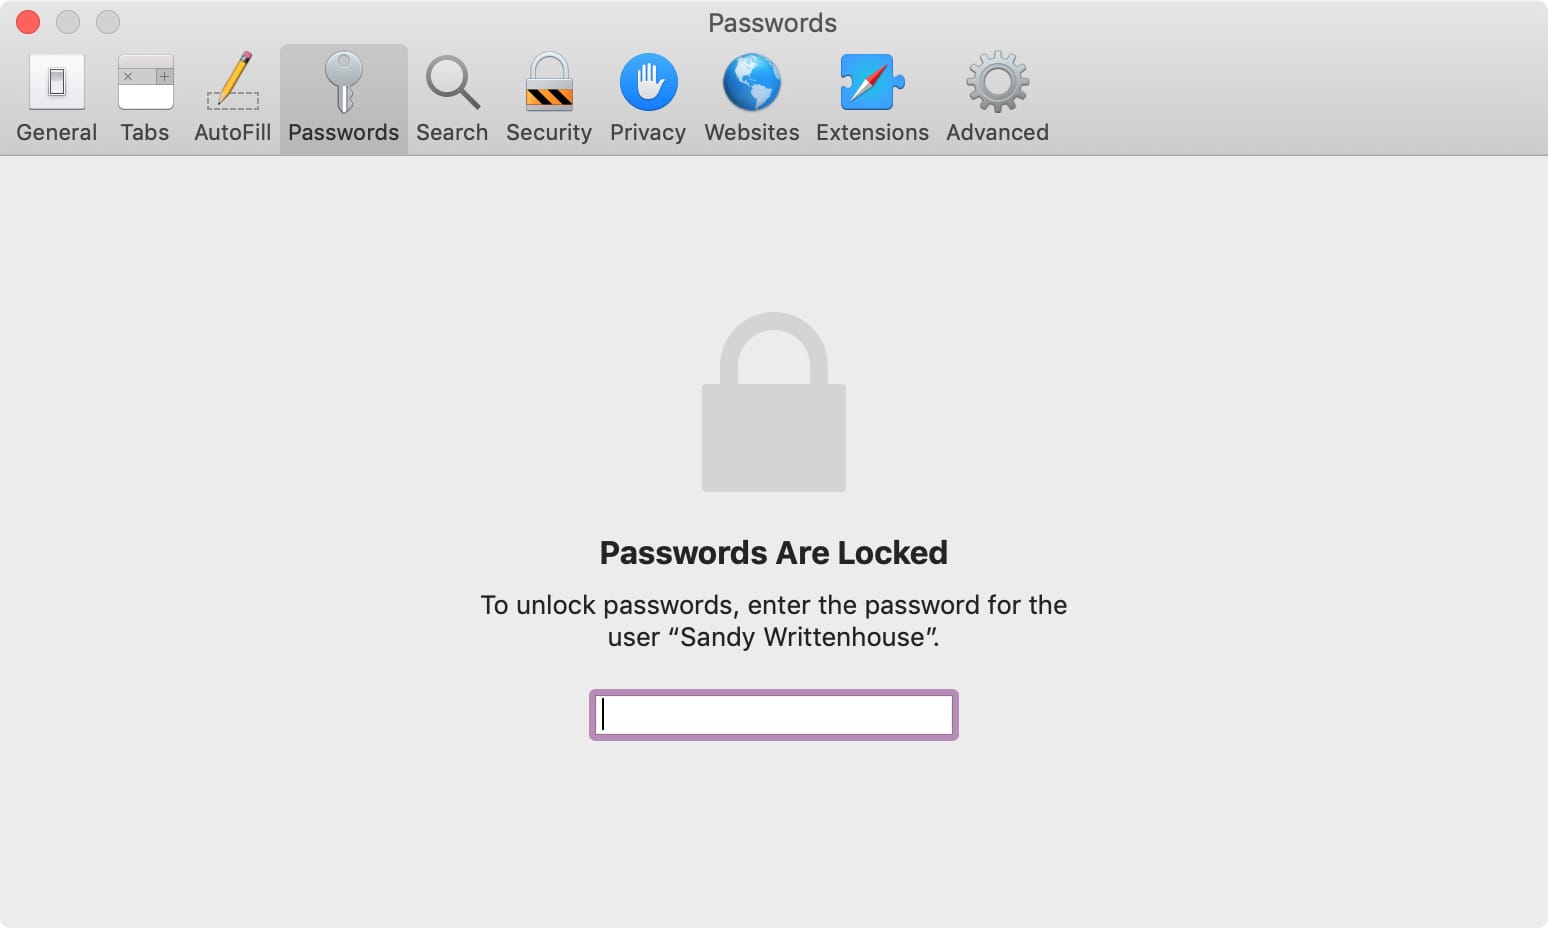 How to find saved passwords on Mac